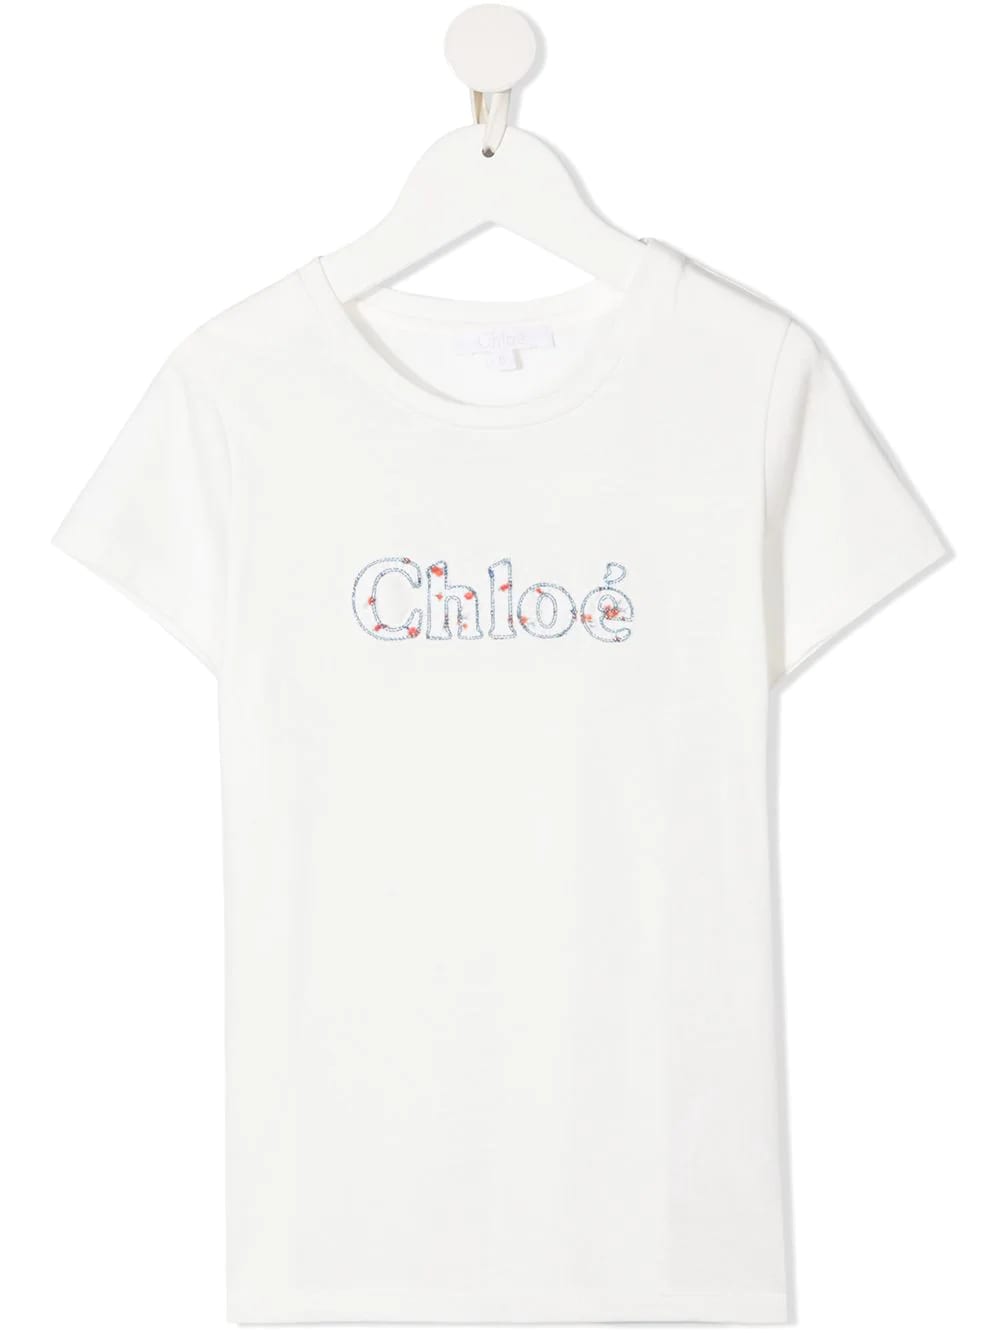 Chloé Kid White T-shirt With Chloe Embroidery